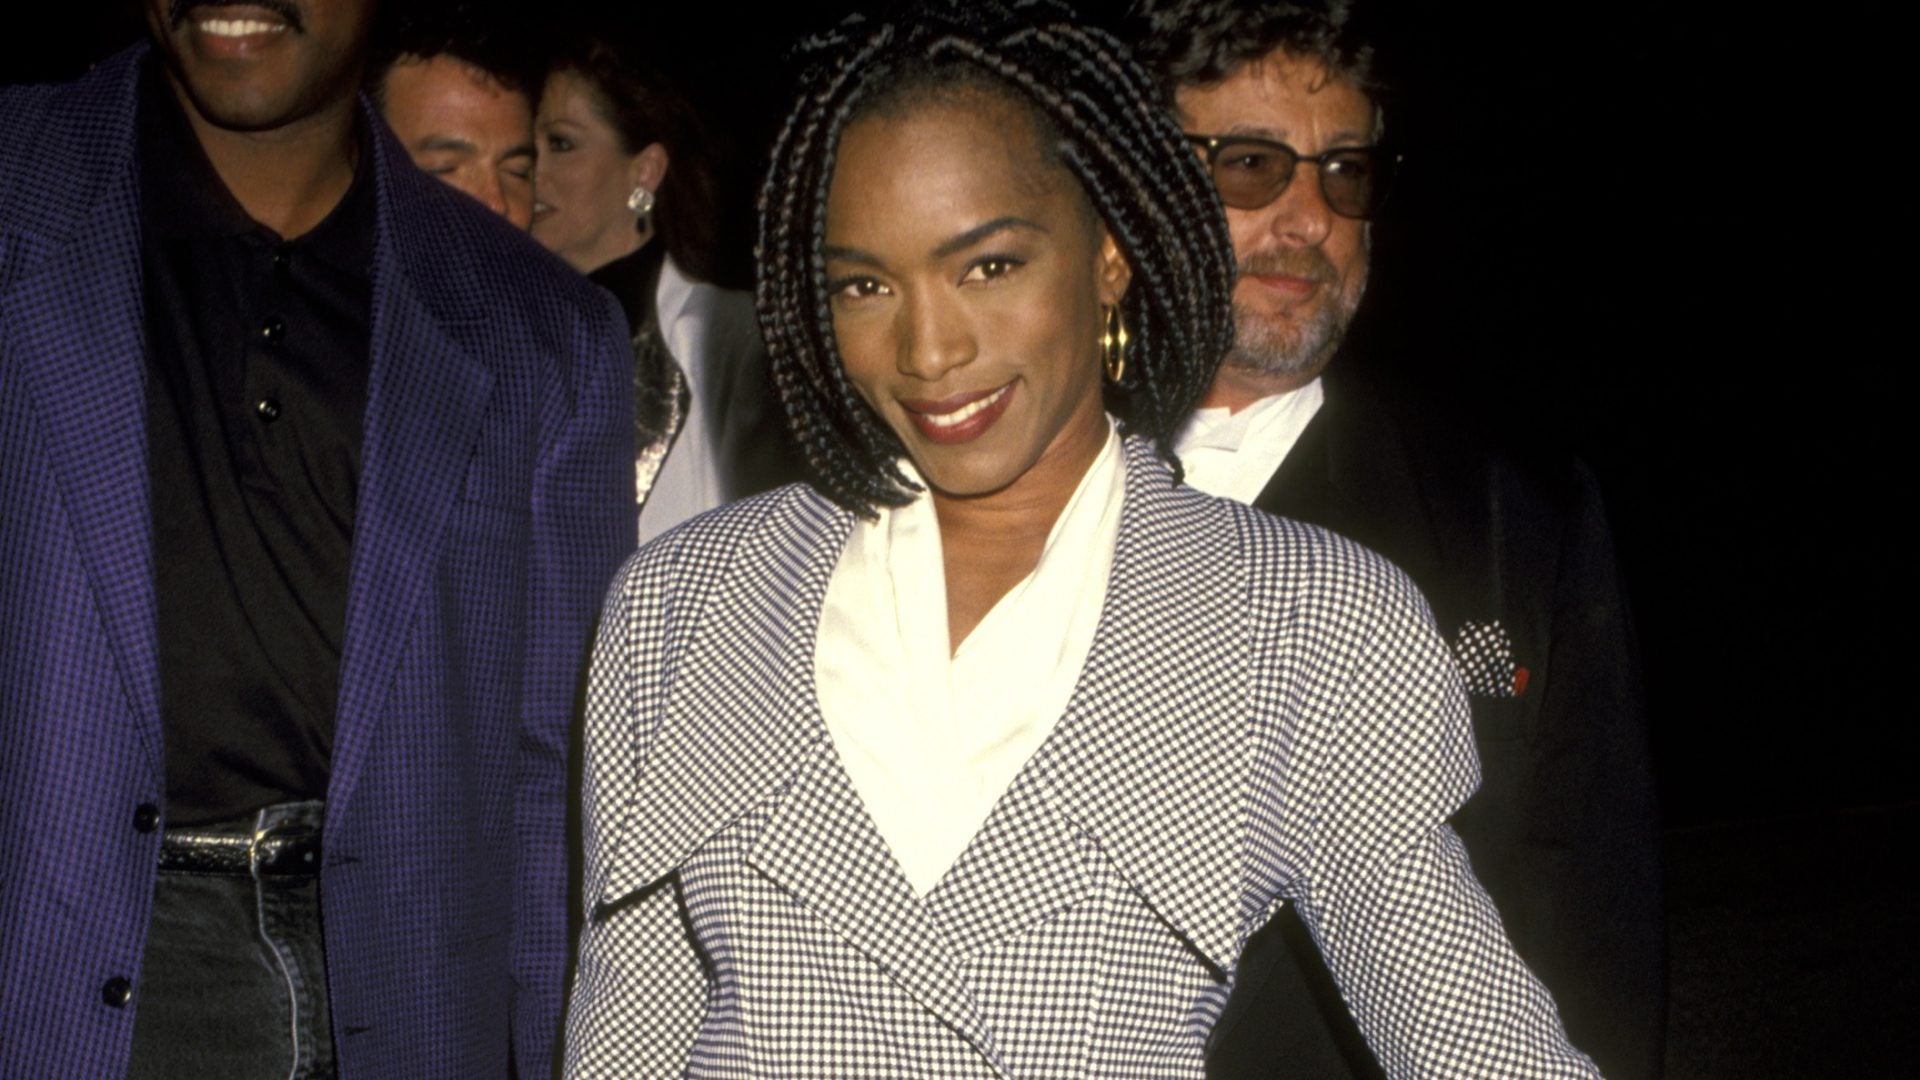 Channeling Nostalgia With This Look: Angela Bassett